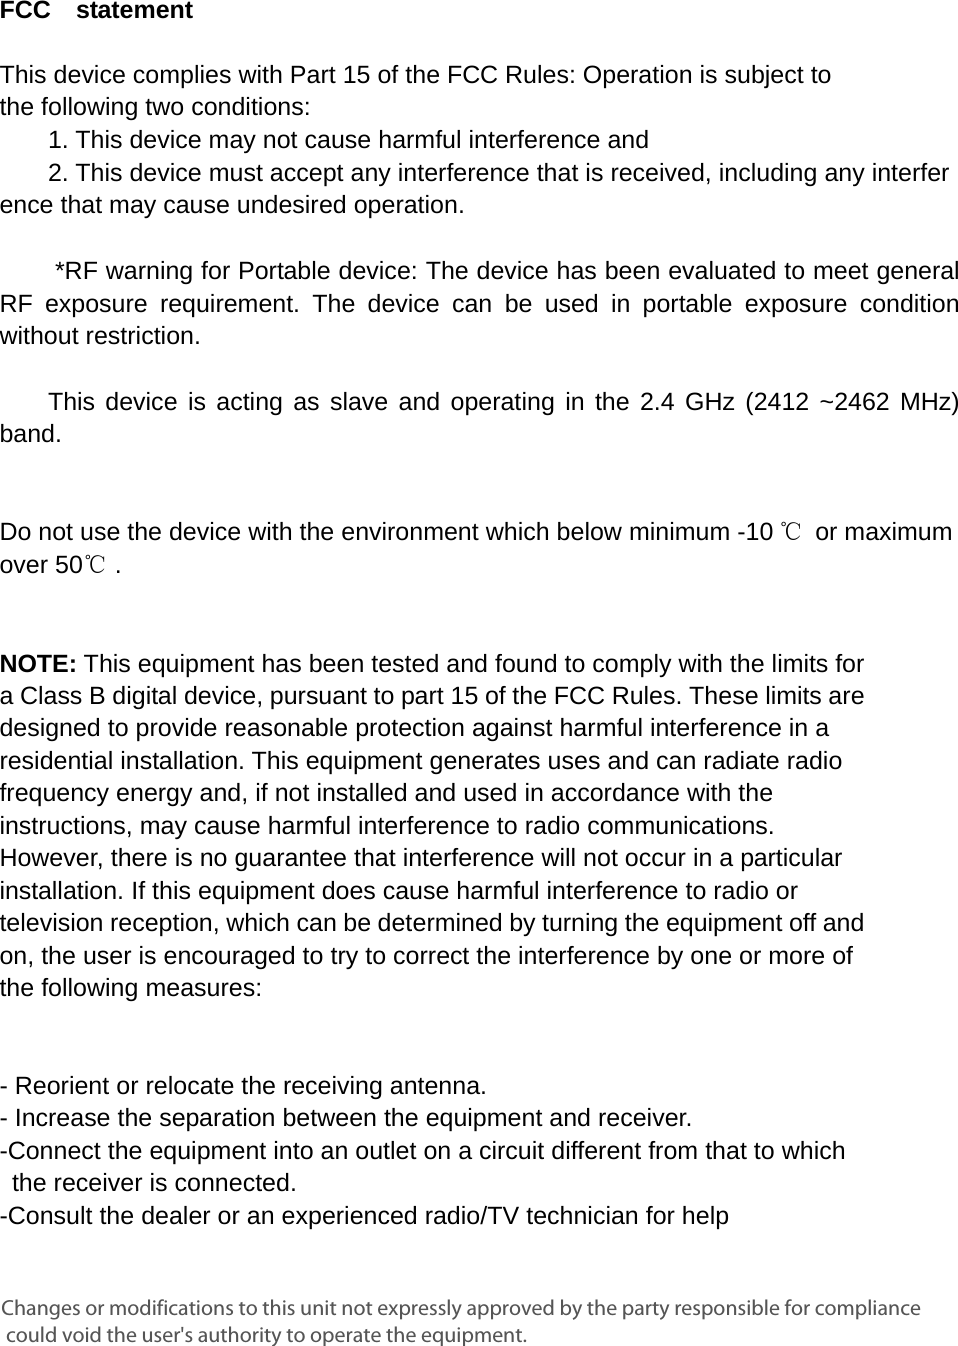      FCC  statement   This device complies with Part 15 of the FCC Rules: Operation is subject to  the following two conditions:   1. This device may not cause harmful interference and   2. This device must accept any interference that is received, including any interference that may cause undesired operation.        *RF warning for Portable device: The device has been evaluated to meet general RF exposure requirement. The device can be used in portable exposure condition without restriction.      This device is acting as slave and operating in the 2.4 GHz (2412 ~2462 MHz) band.      Do not use the device with the environment which below minimum -10 ℃ or maximum over 50℃ .     NOTE: This equipment has been tested and found to comply with the limits for a Class B digital device, pursuant to part 15 of the FCC Rules. These limits are designed to provide reasonable protection against harmful interference in a residential installation. This equipment generates uses and can radiate radio frequency energy and, if not installed and used in accordance with the instructions, may cause harmful interference to radio communications. However, there is no guarantee that interference will not occur in a particular installation. If this equipment does cause harmful interference to radio or television reception, which can be determined by turning the equipment off and on, the user is encouraged to try to correct the interference by one or more of the following measures:      - Reorient or relocate the receiving antenna. - Increase the separation between the equipment and receiver.   -Connect the equipment into an outlet on a circuit different from that to which the receiver is connected.   -Consult the dealer or an experienced radio/TV technician for help Changes or modifications to this unit not expressly approved by the party responsible for compliance could void the user&apos;s authority to operate the equipment.